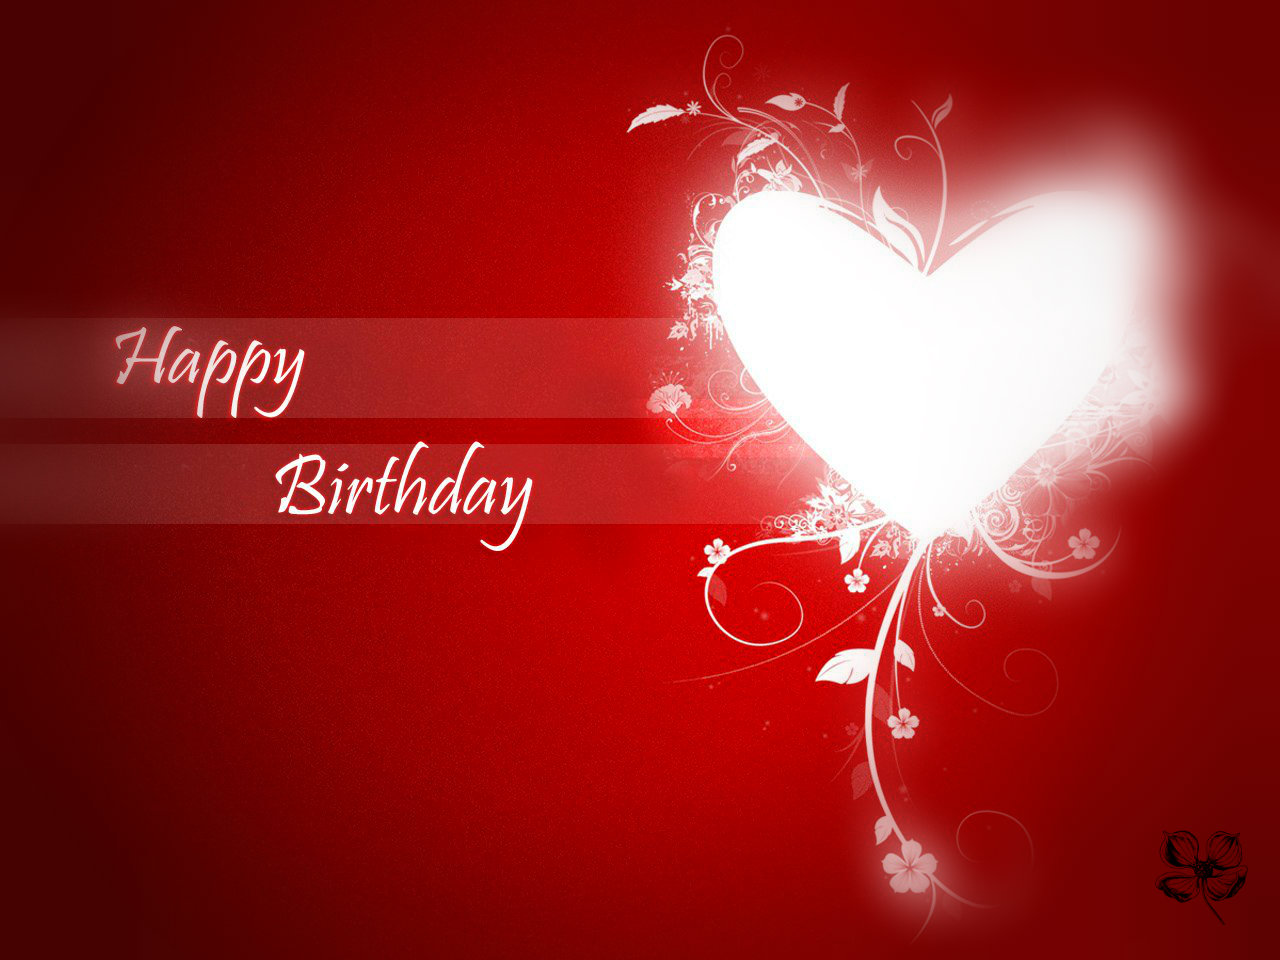 Happy Birthday Wallpaper Collection For Free Download